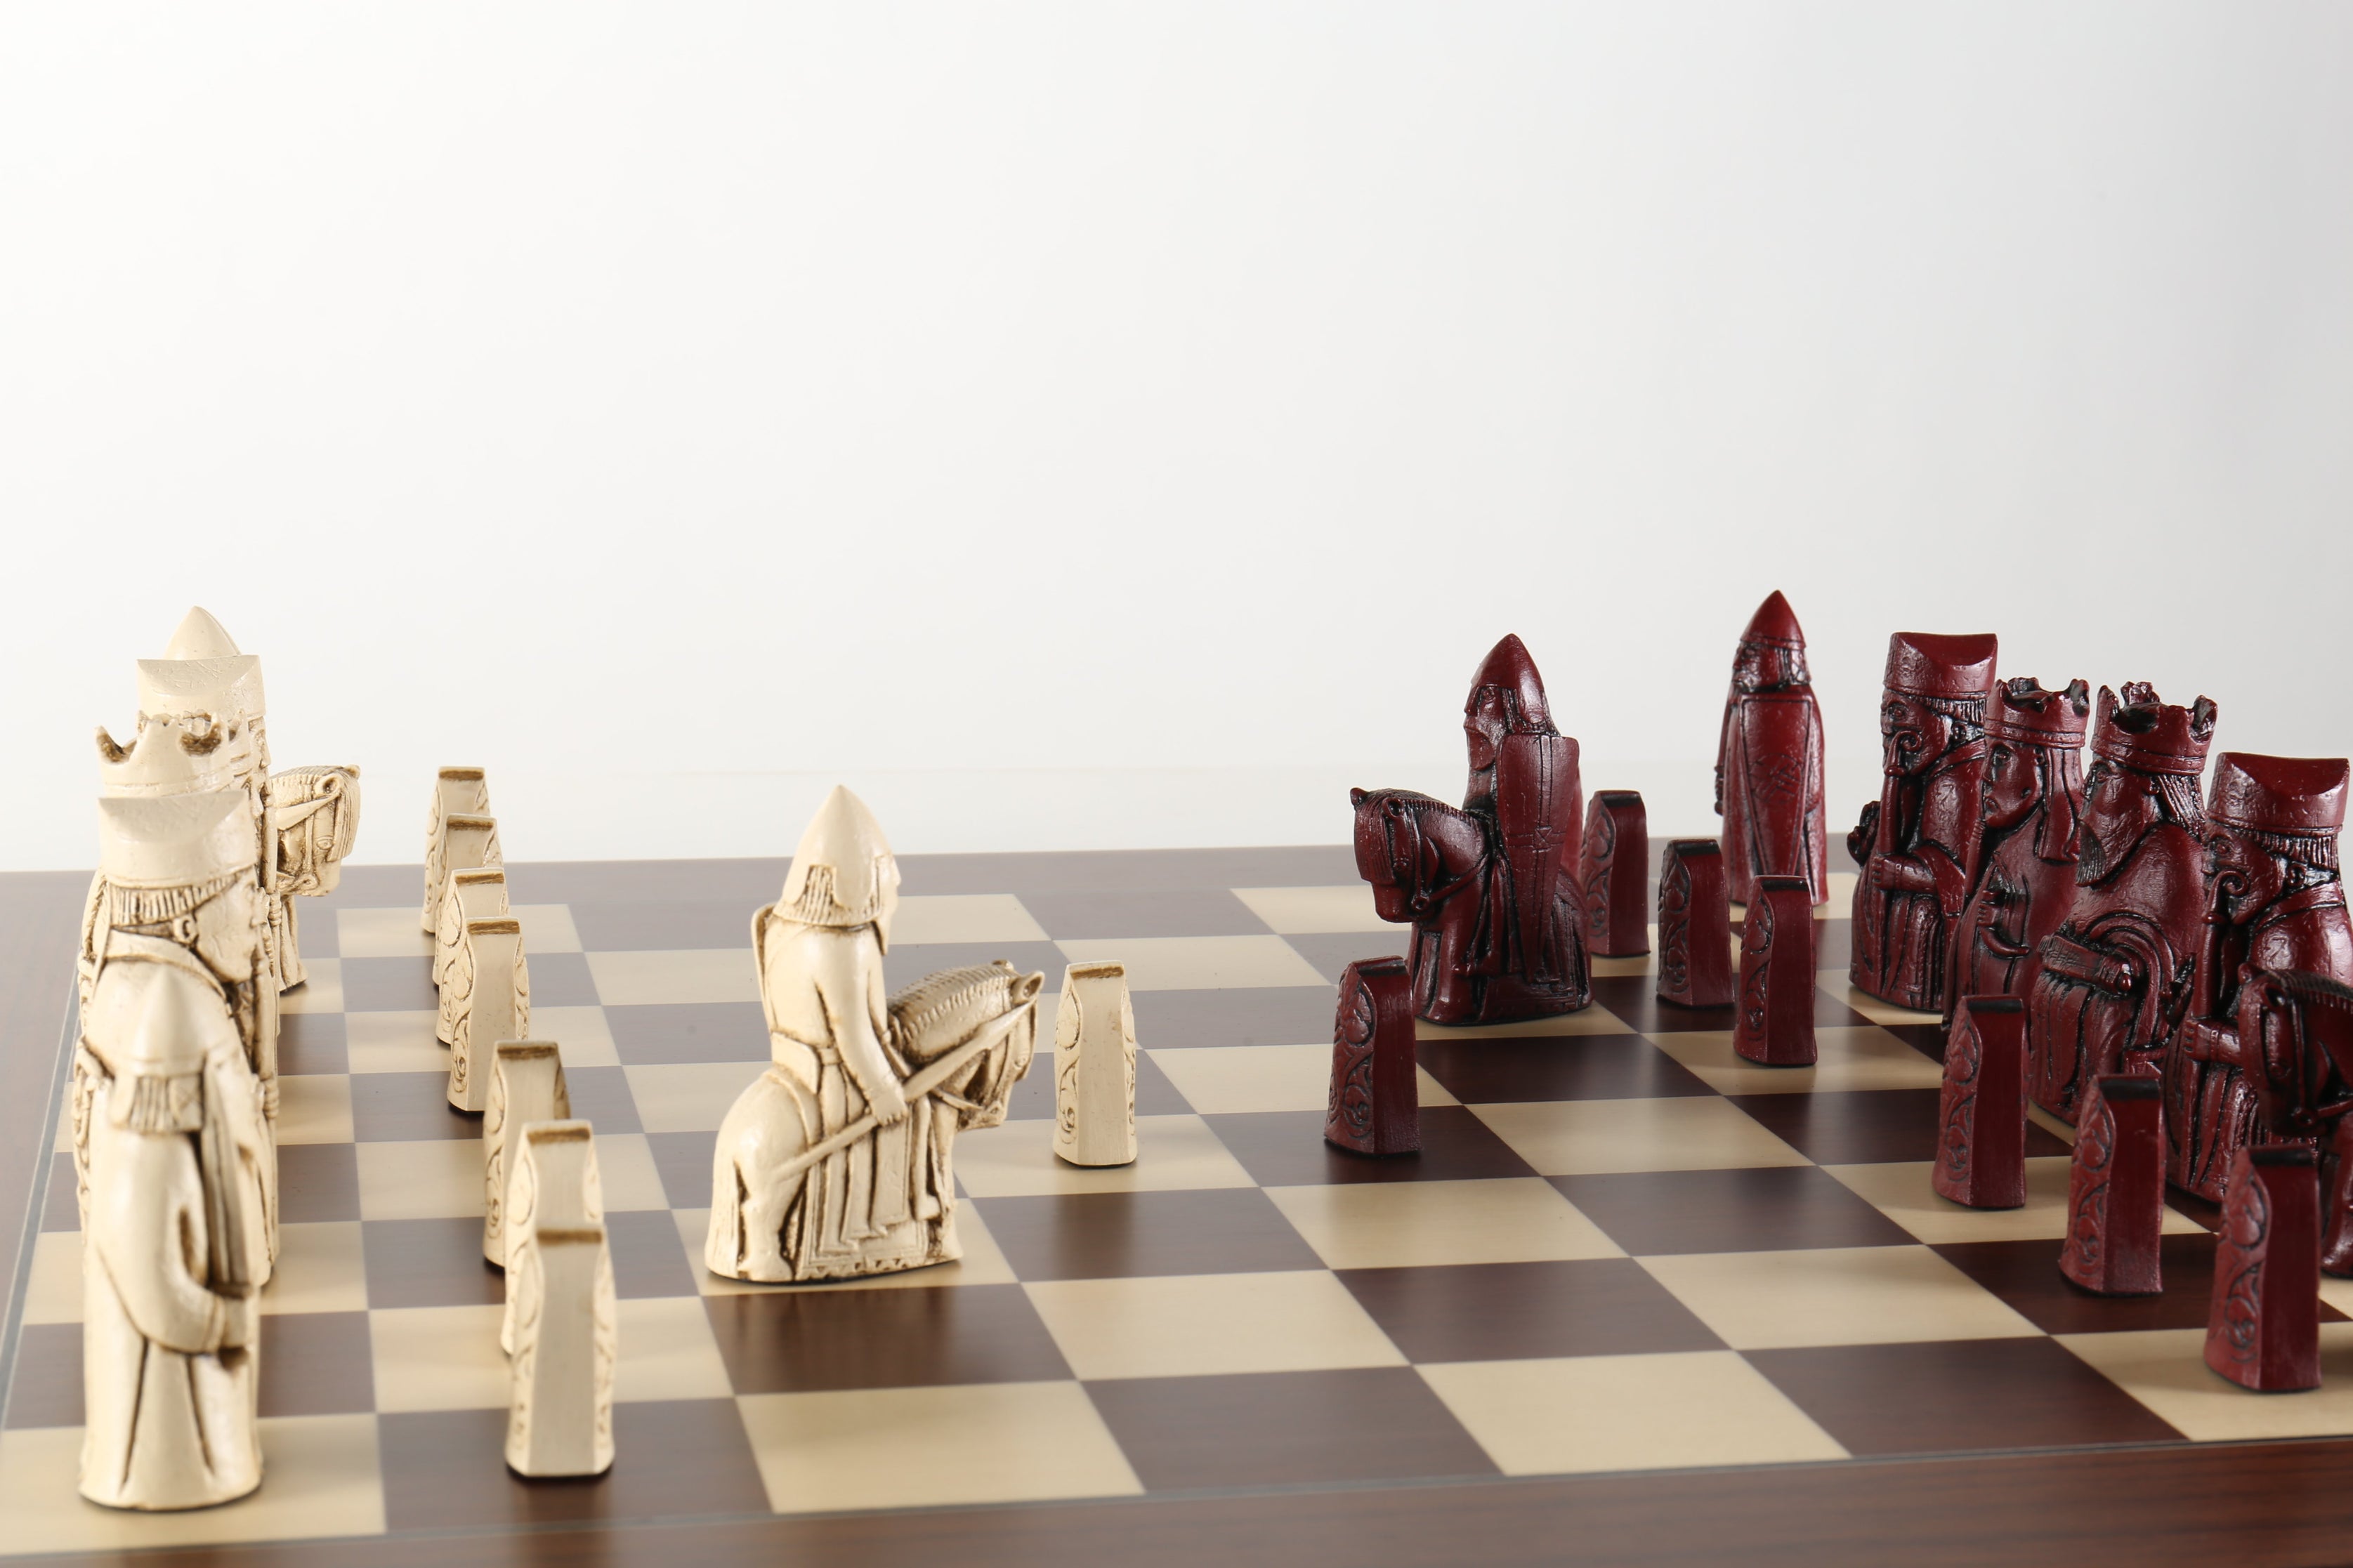  Berkeley Chess Classic Movie/Film Stars Ornamental Chess Set  (in Cream and red, Chessboard not Included) : Toys & Games